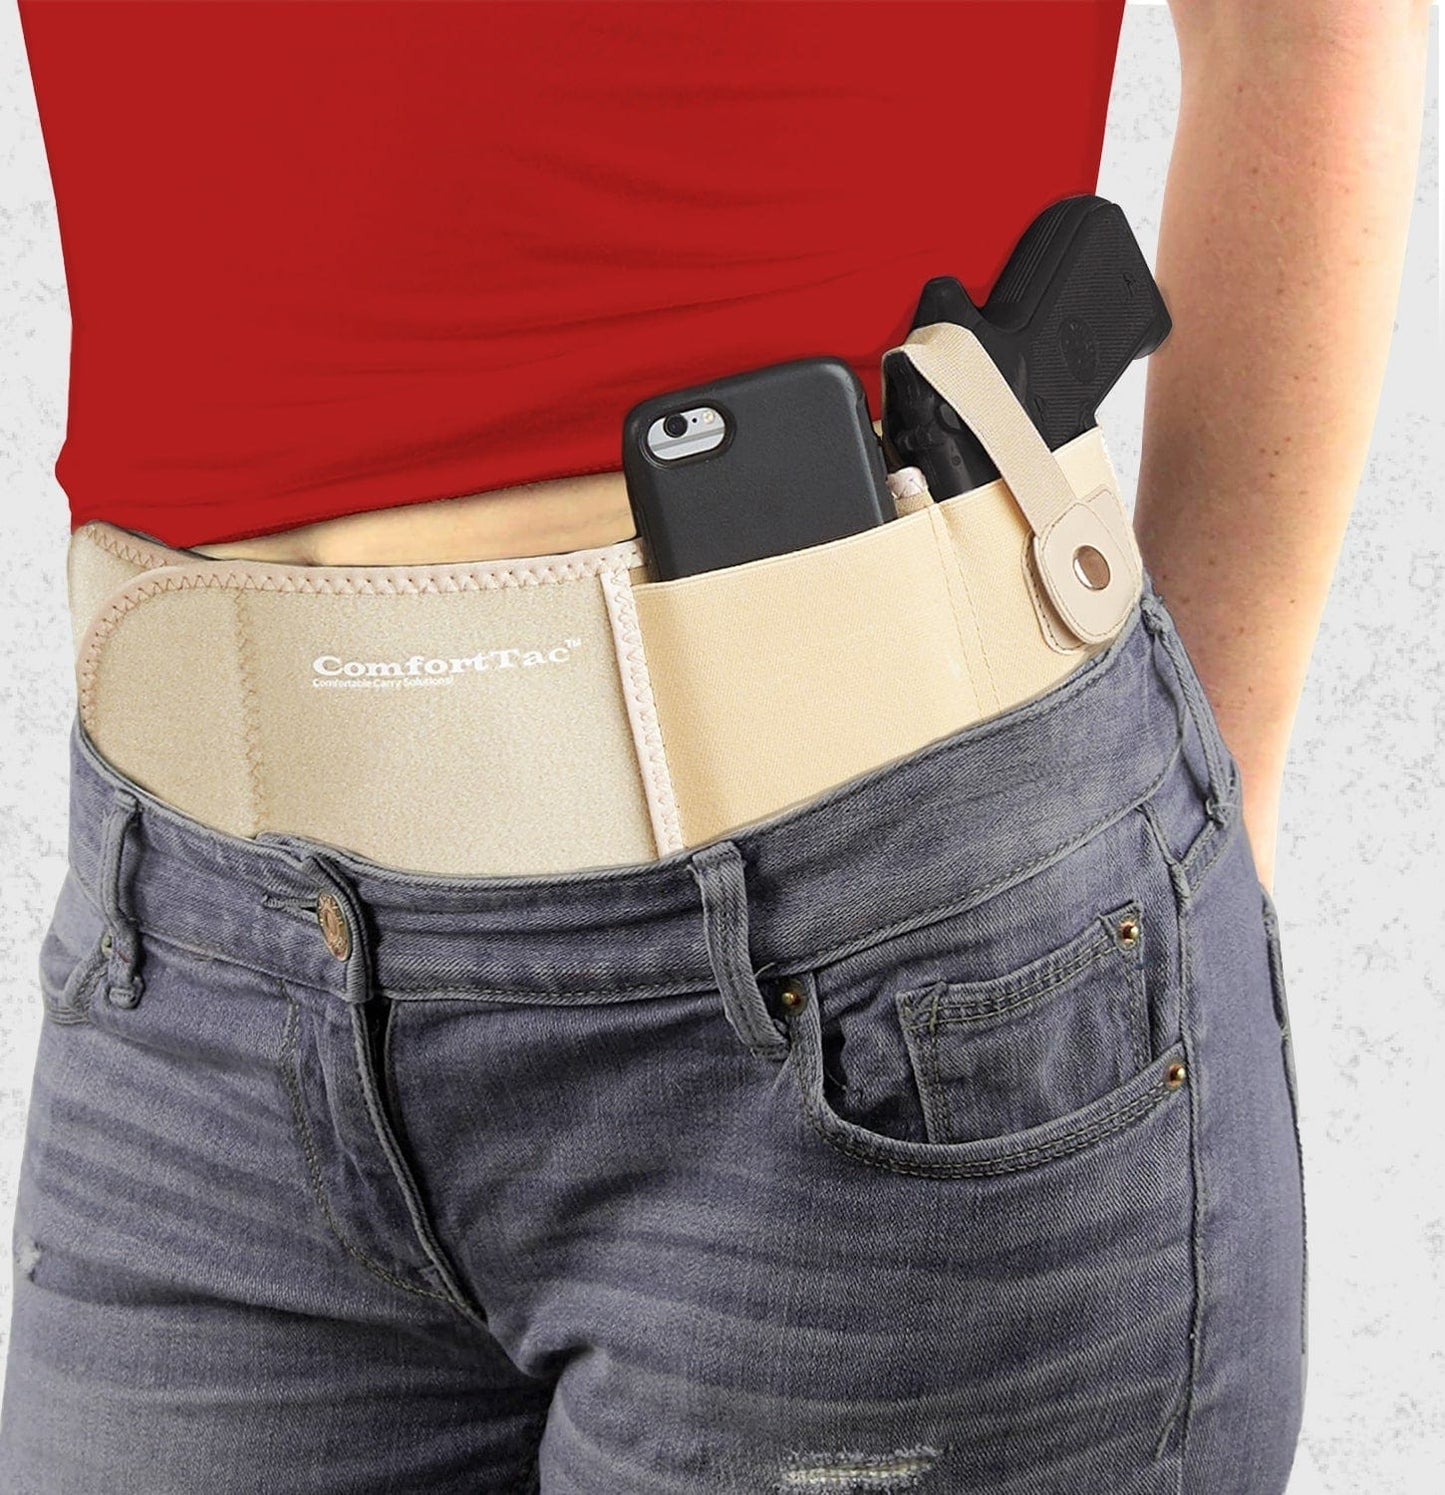 Chief Miller Belly Band Holster Ultimate Belly Band Holster Apparel